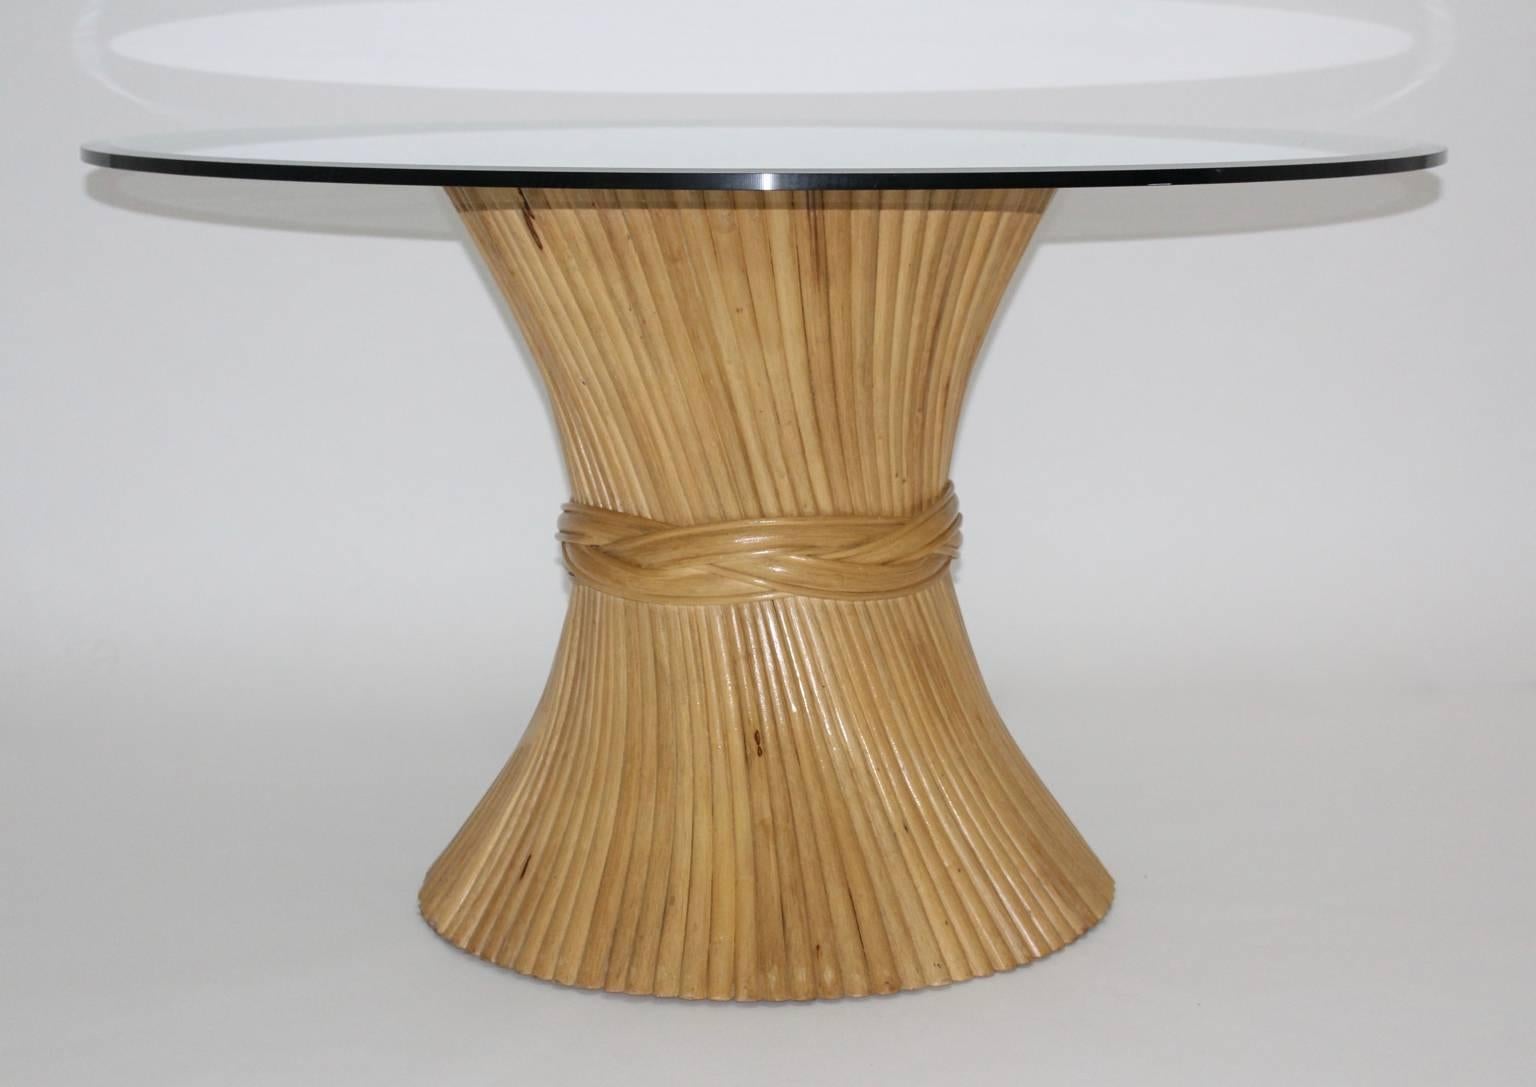 Organic vintage sheaf of wheat bamboo dining table or center table by Mc Guire circa 1970 United States.
Inspired by nature the table shows an organic shape like a sheaf of wheat tapered with a band.
Beautiful as a center table in your anteroom or